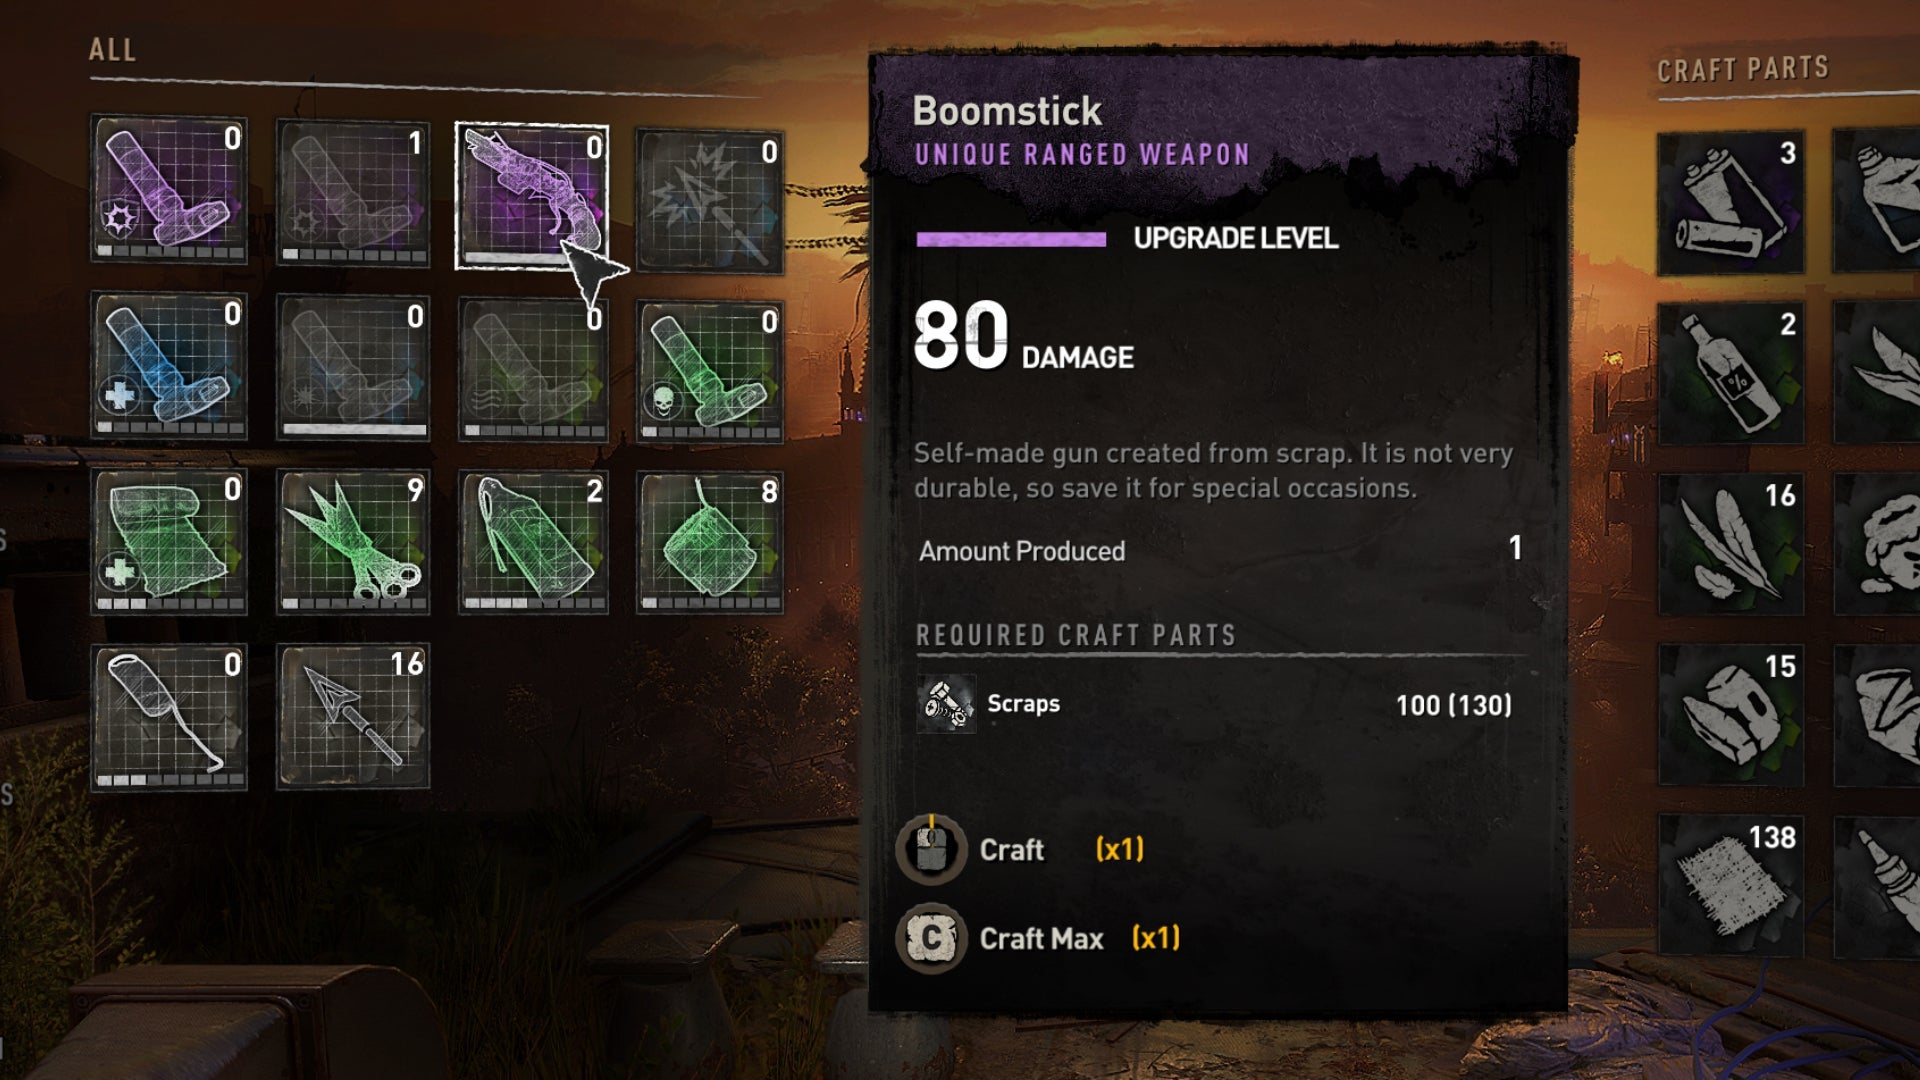 Assembling a boomstick from scavenged items in Dying Light 2's crafting menu.